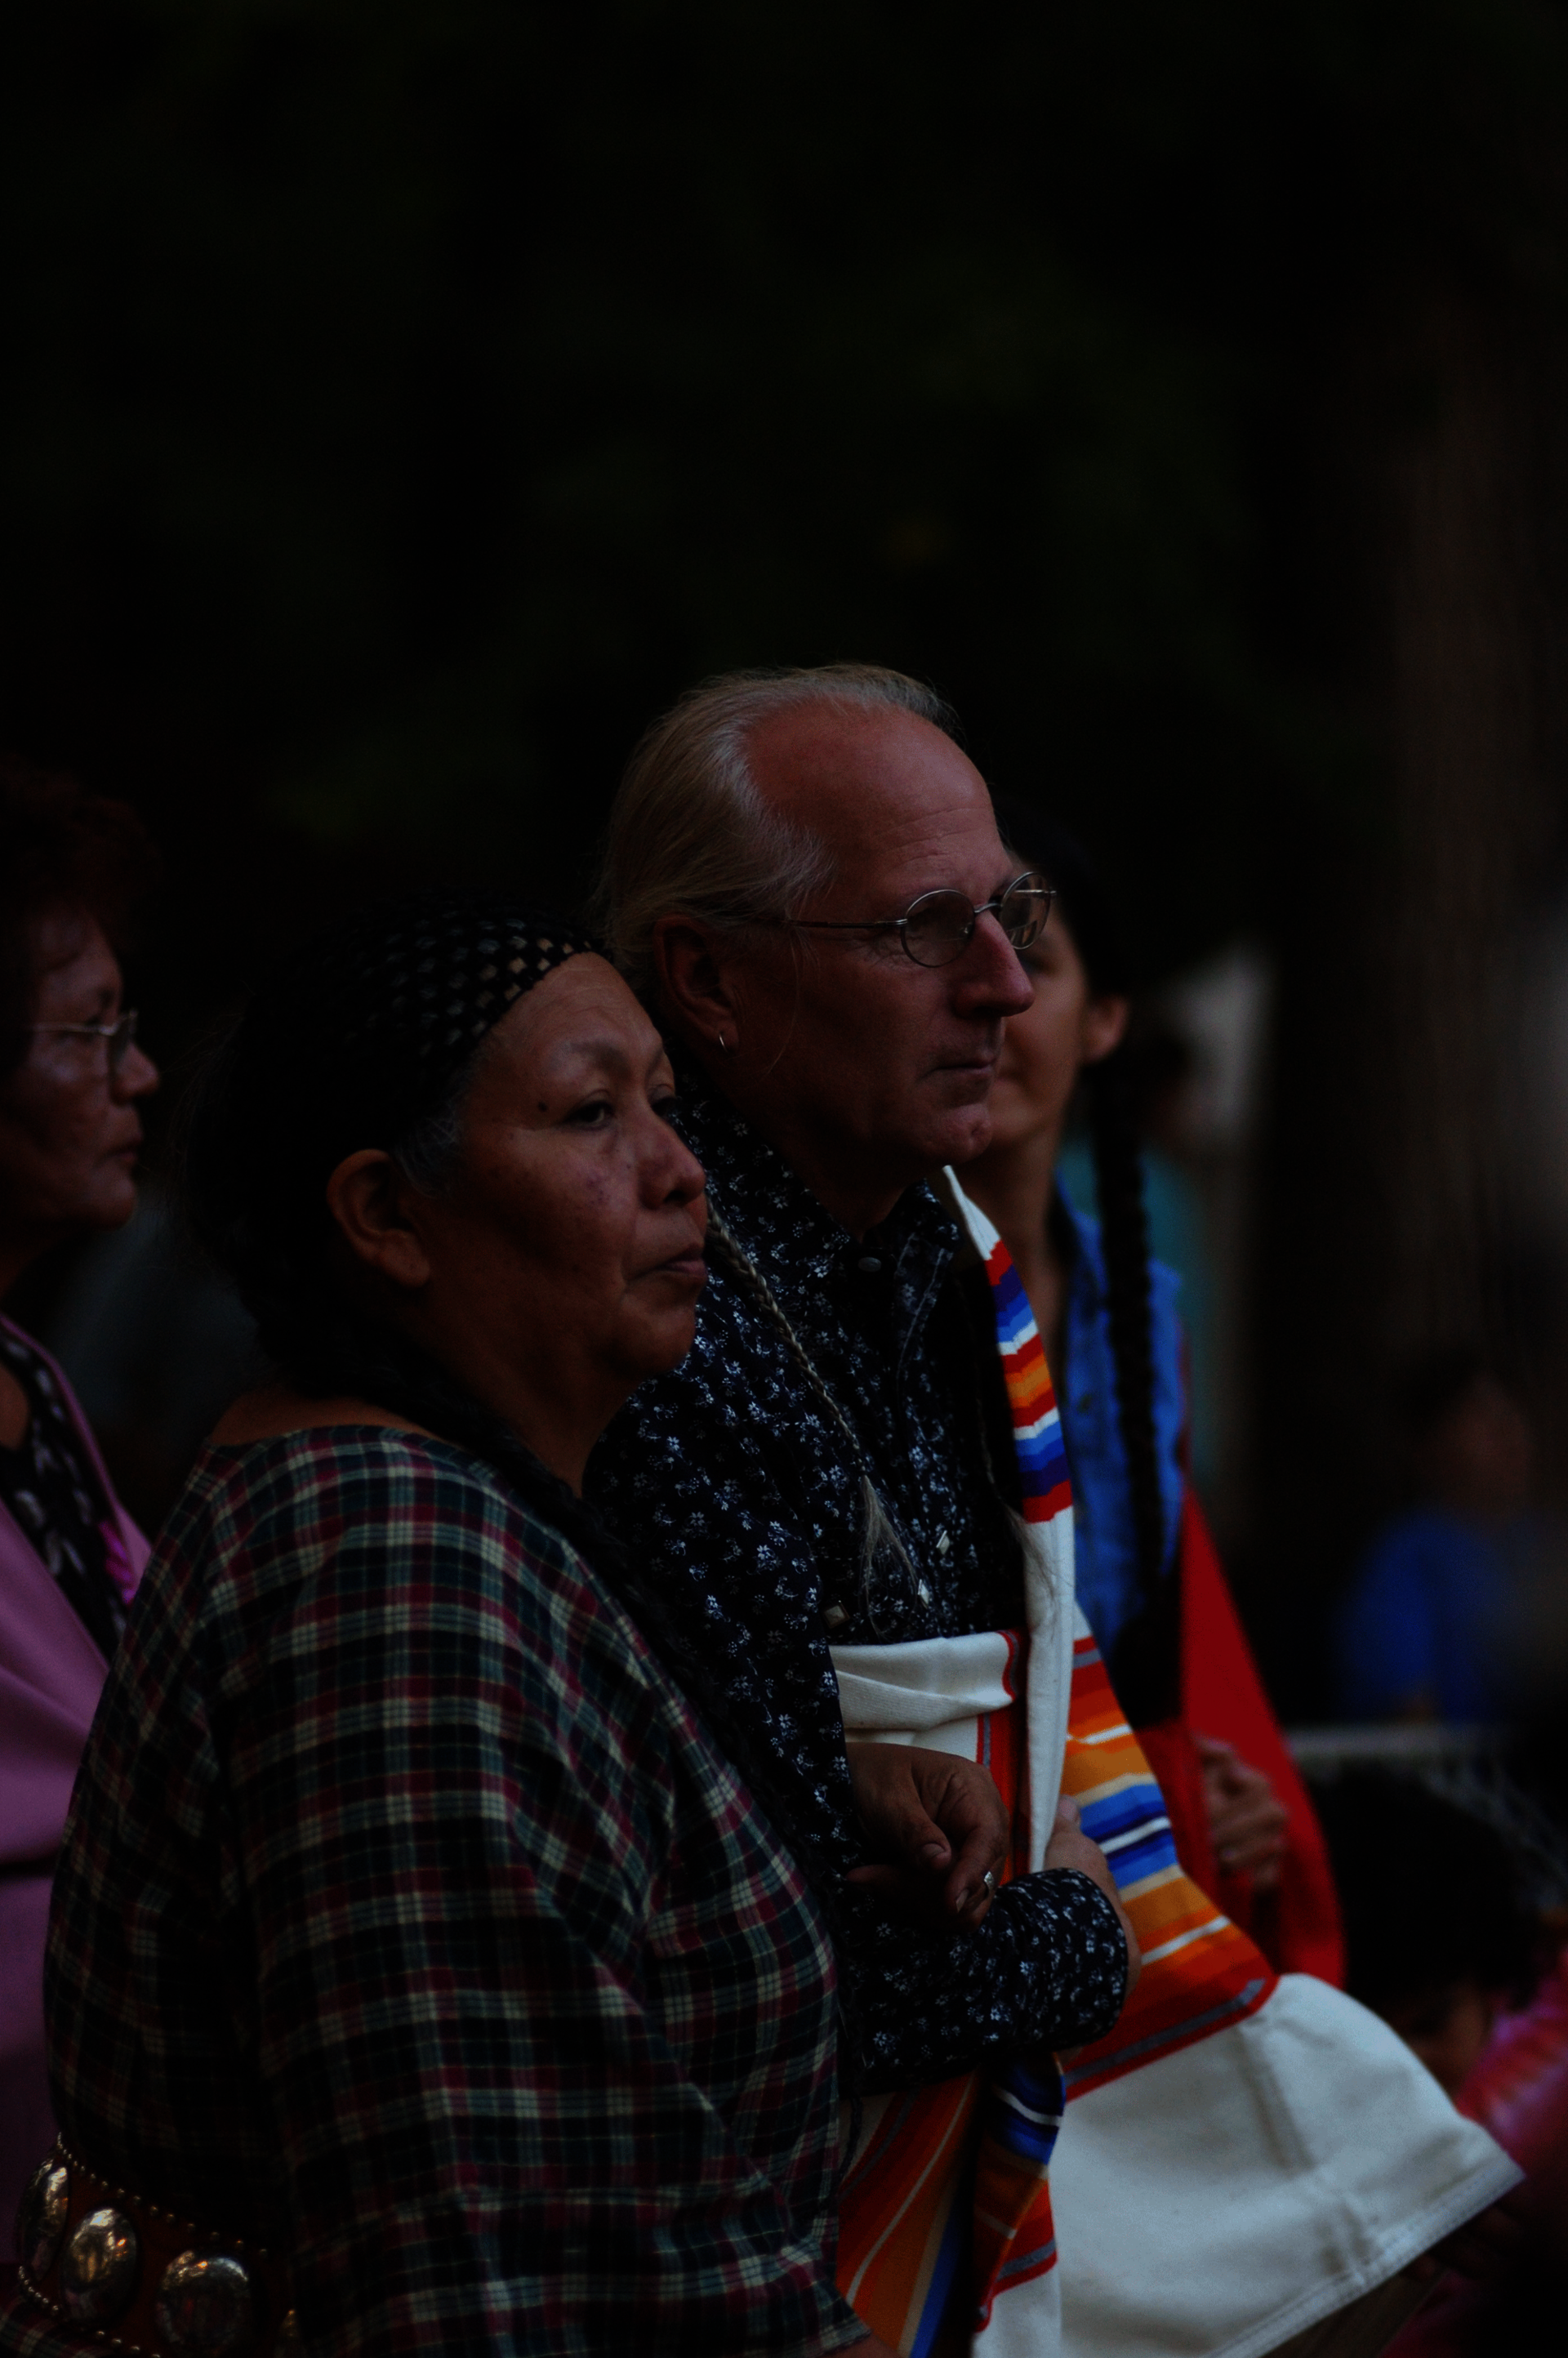 Photo of an older couple in profile. She wears long dark braids, a bandana, and a plaid shirt. He has glasses and white hair and wears a colorful striped textile over his shoulder.